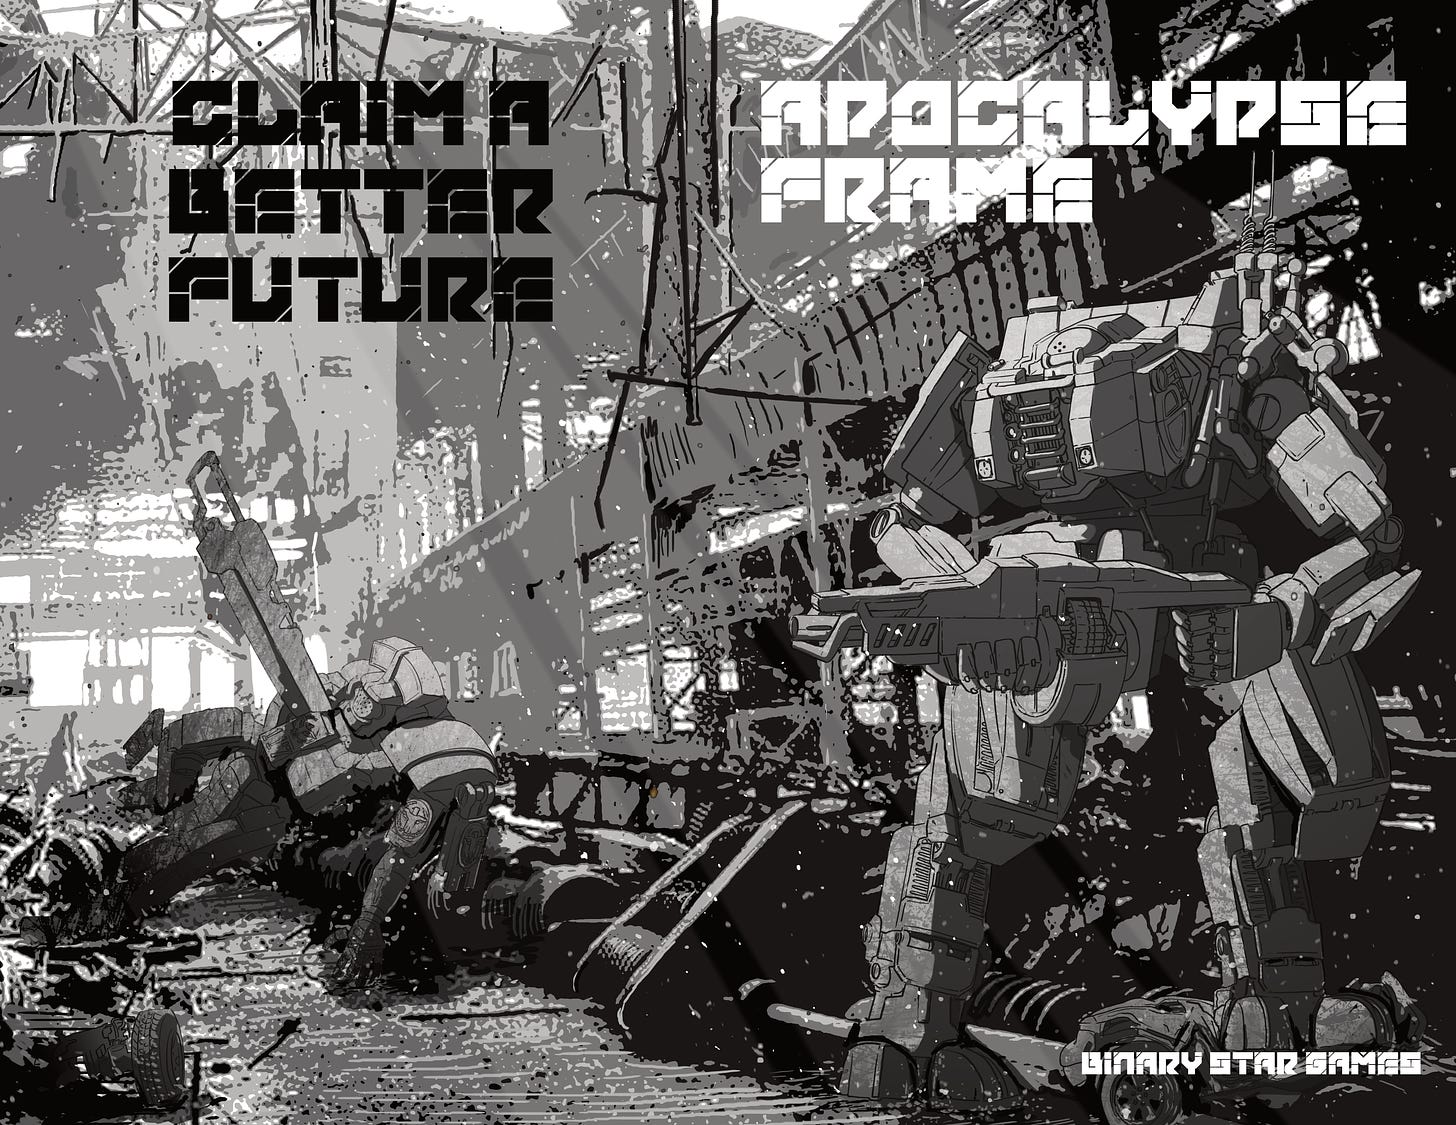 Claim a Better Future on the left, Apocalypse Frame on the right, Binary Star Games on the bottom left. A mech with a gun stands on the right, while a mech with Roman details is lying on the ground to the left with a sword in it. The background is an industrial area.